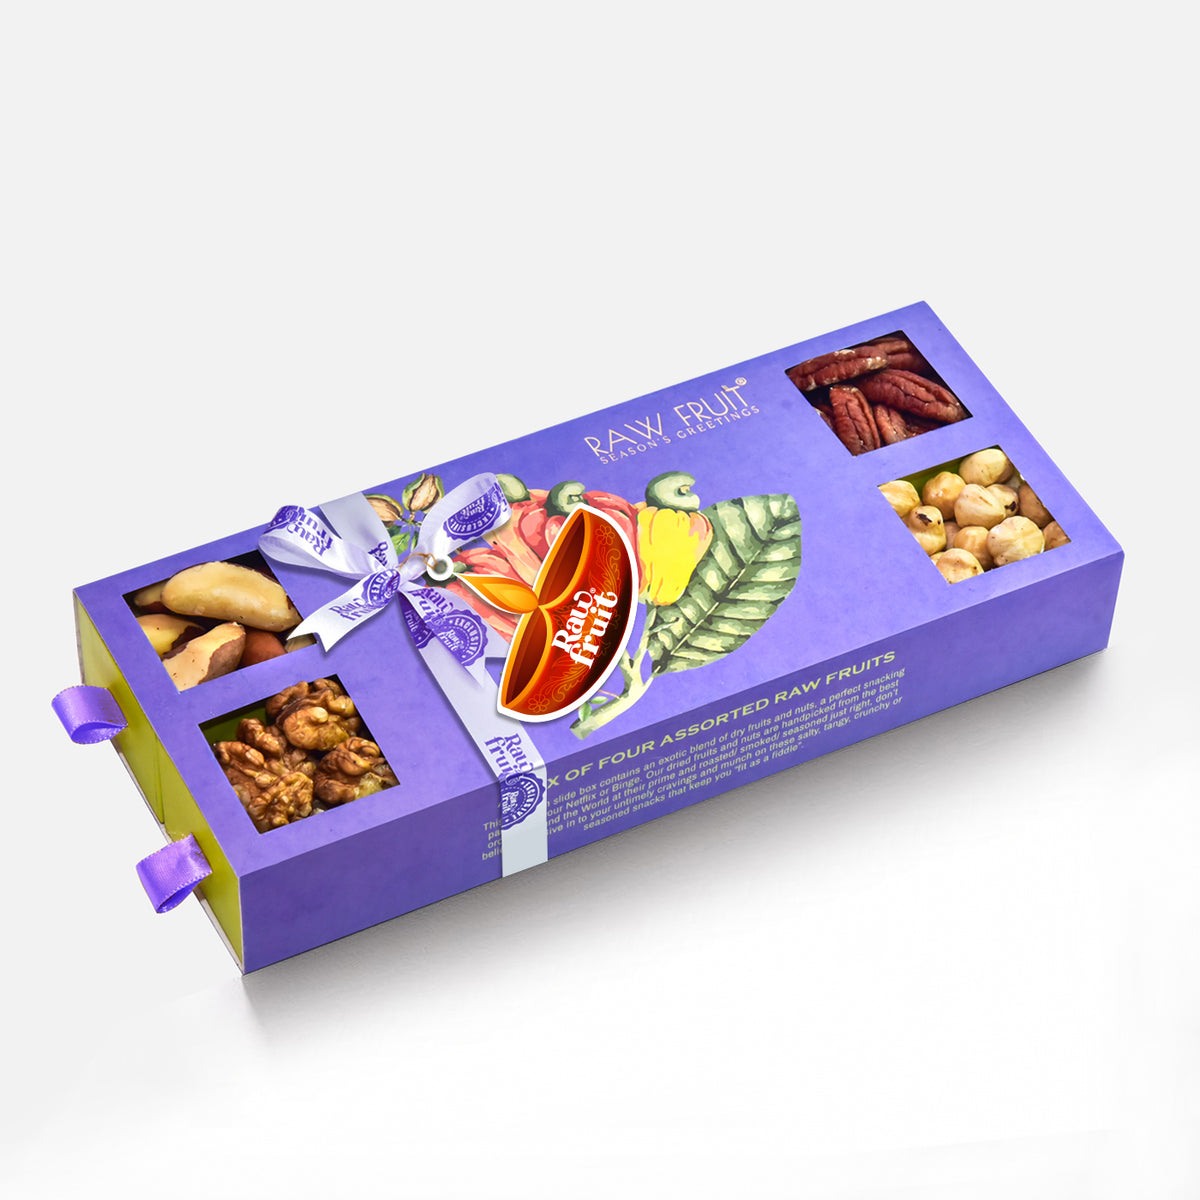 Sunfeast Dark Fantasy Expressions Biscuits Gift Pack Price - Buy Online at  ₹99 in India